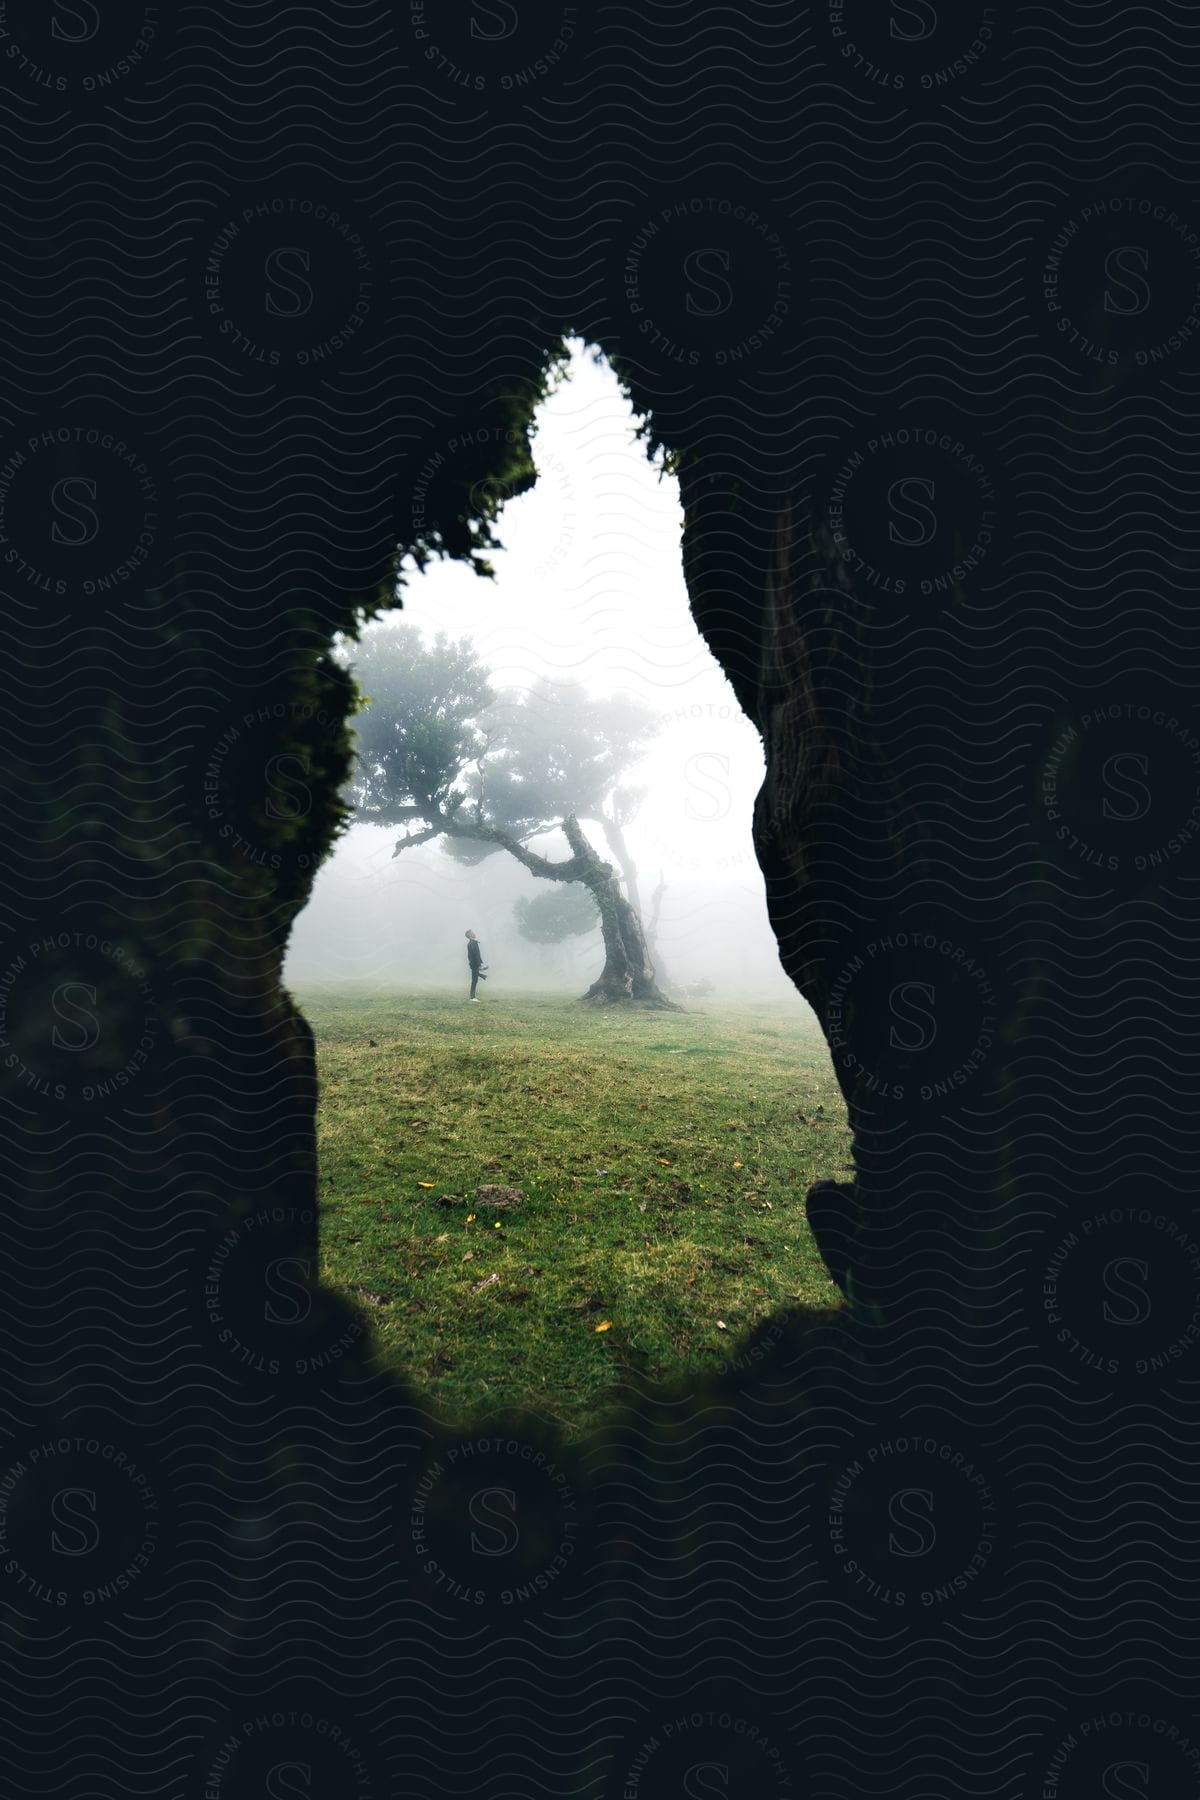 A man stands in a grassy field looking up at a tree on a foggy day as seen through a hole in a cave